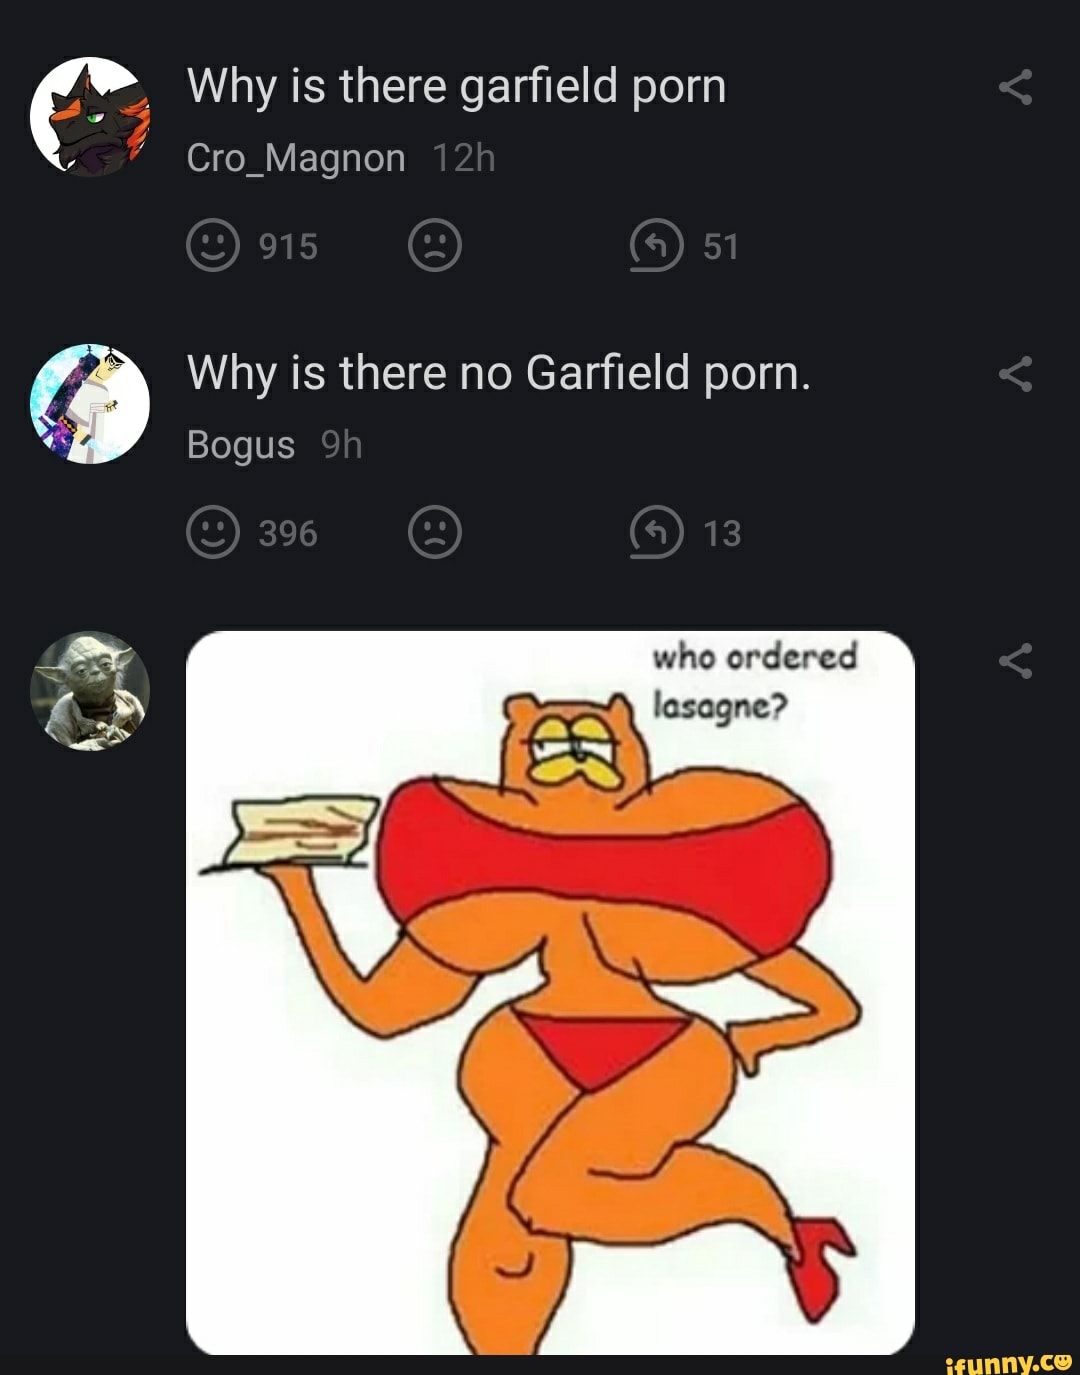 1080px x 1375px - Why is there garfield porn 915 51 Cro_Magnon Why is there no Garfield porn.  Bogus 396 13 who ordered lasagne? - iFunny :)